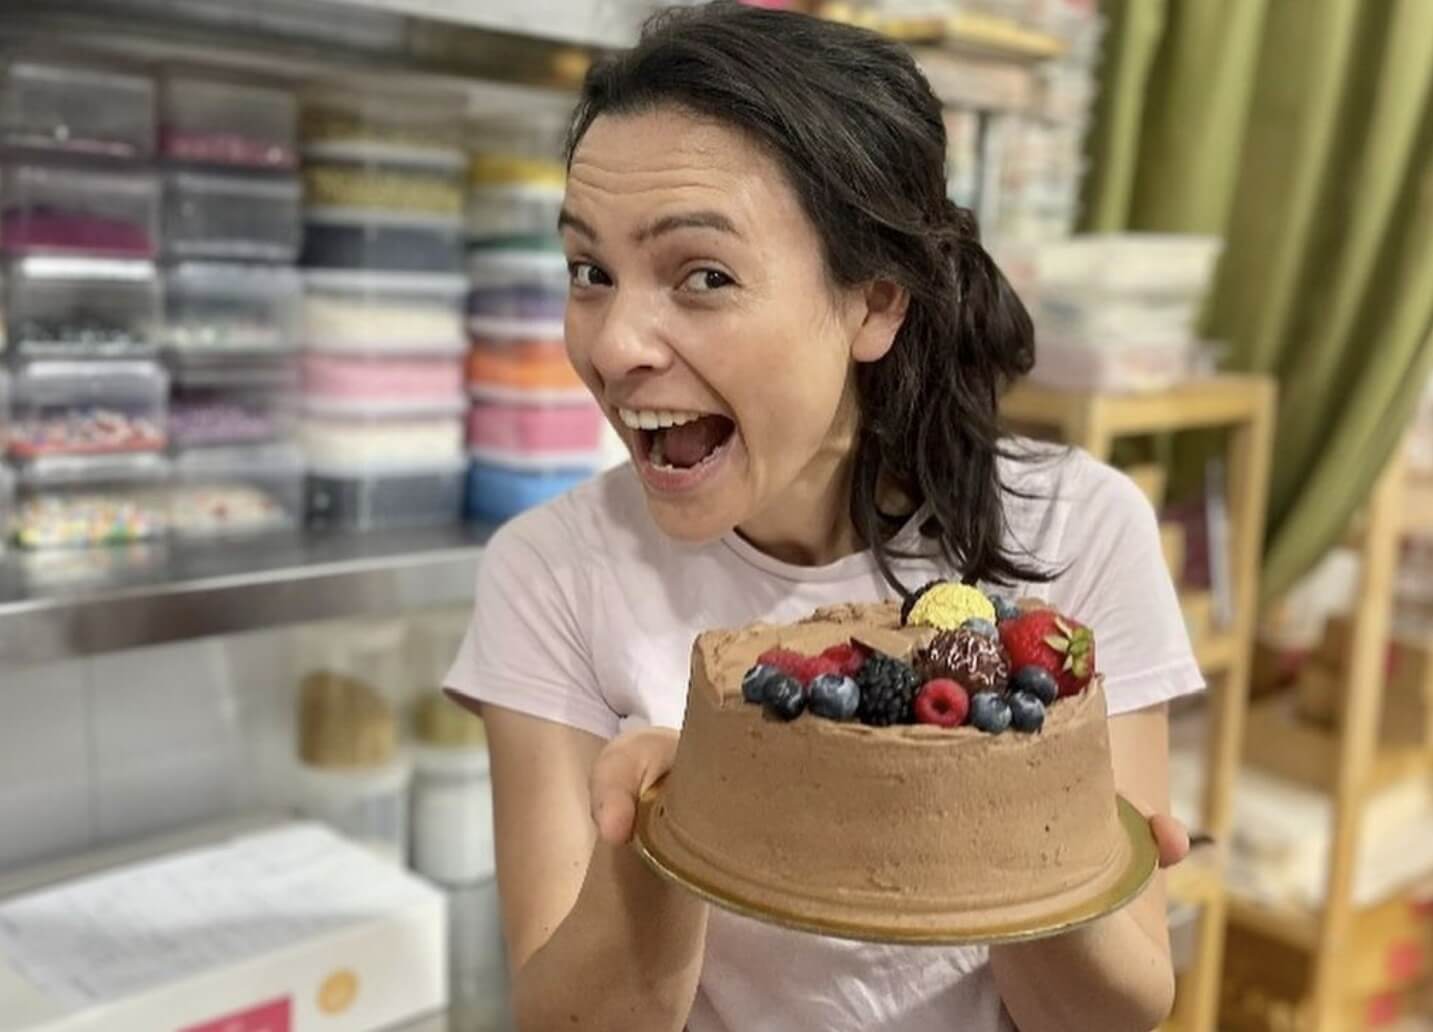 Gabriela with one of the cakes she baked for Harry Styles. Image via Instagram